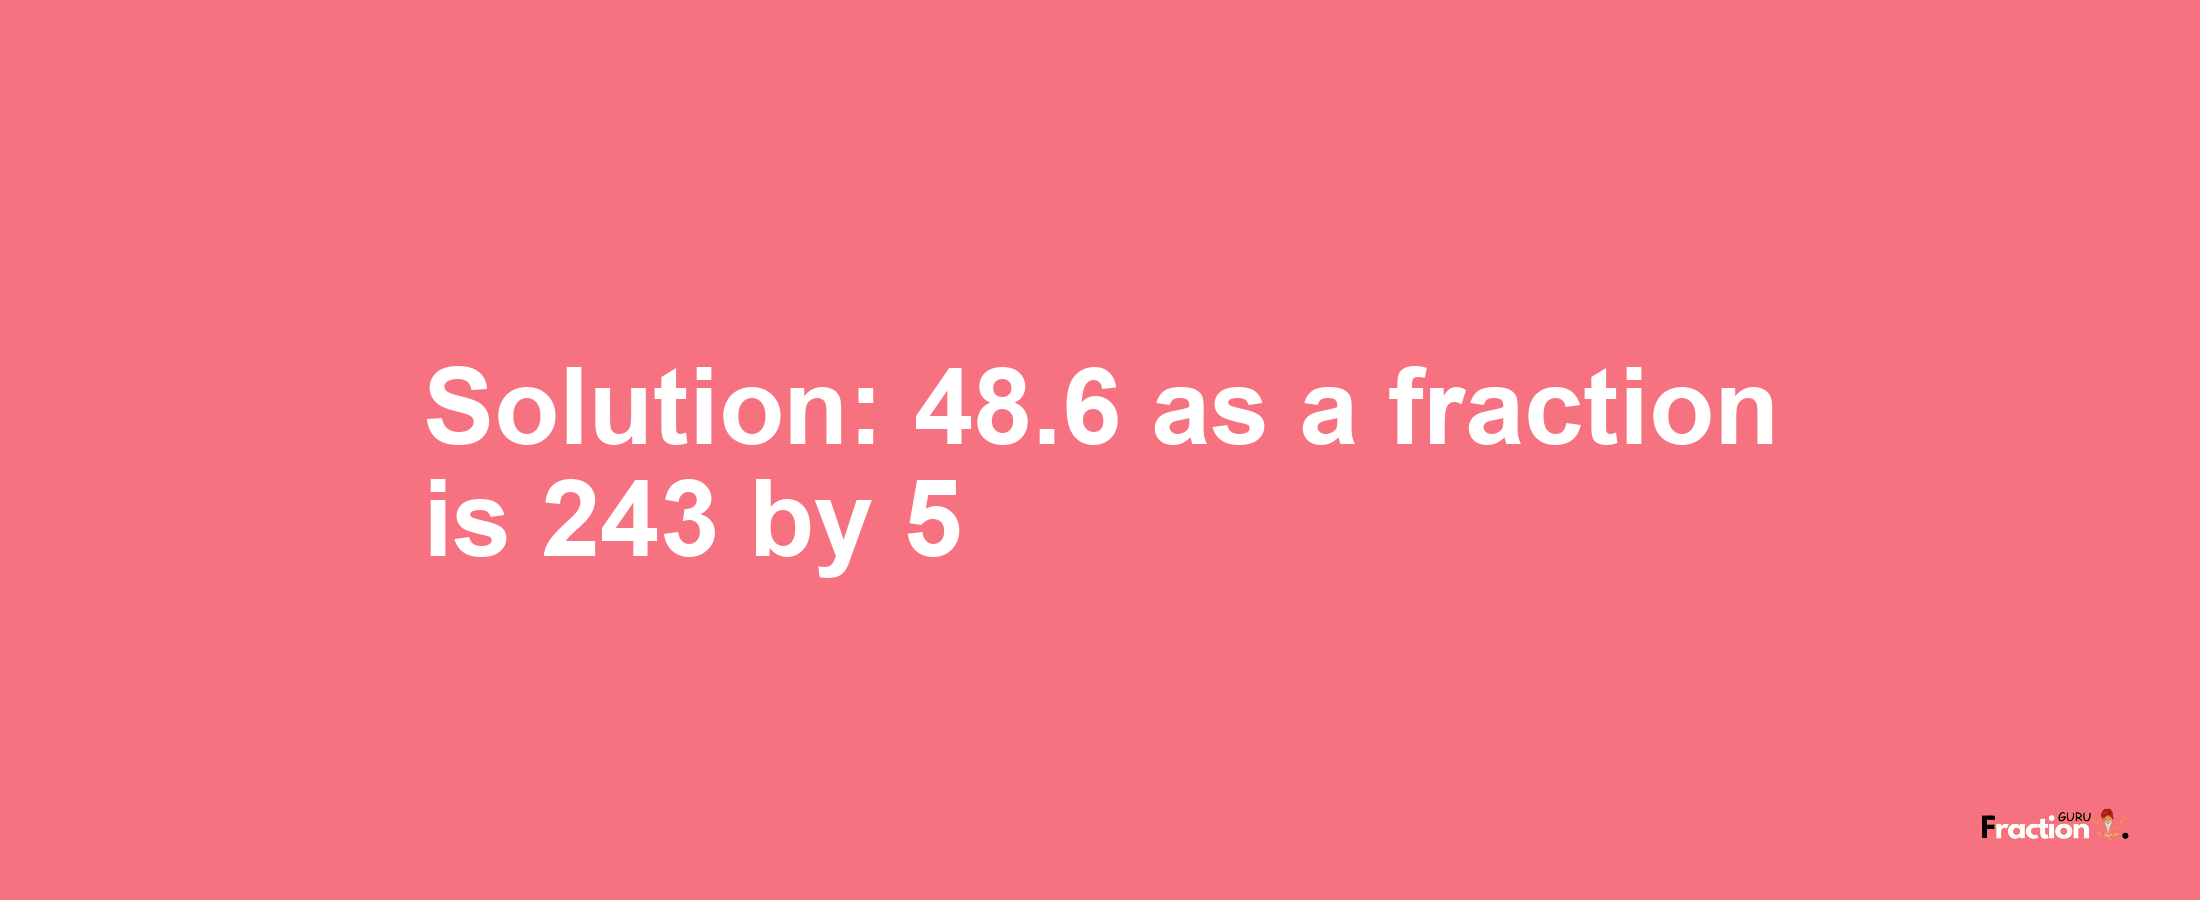 Solution:48.6 as a fraction is 243/5